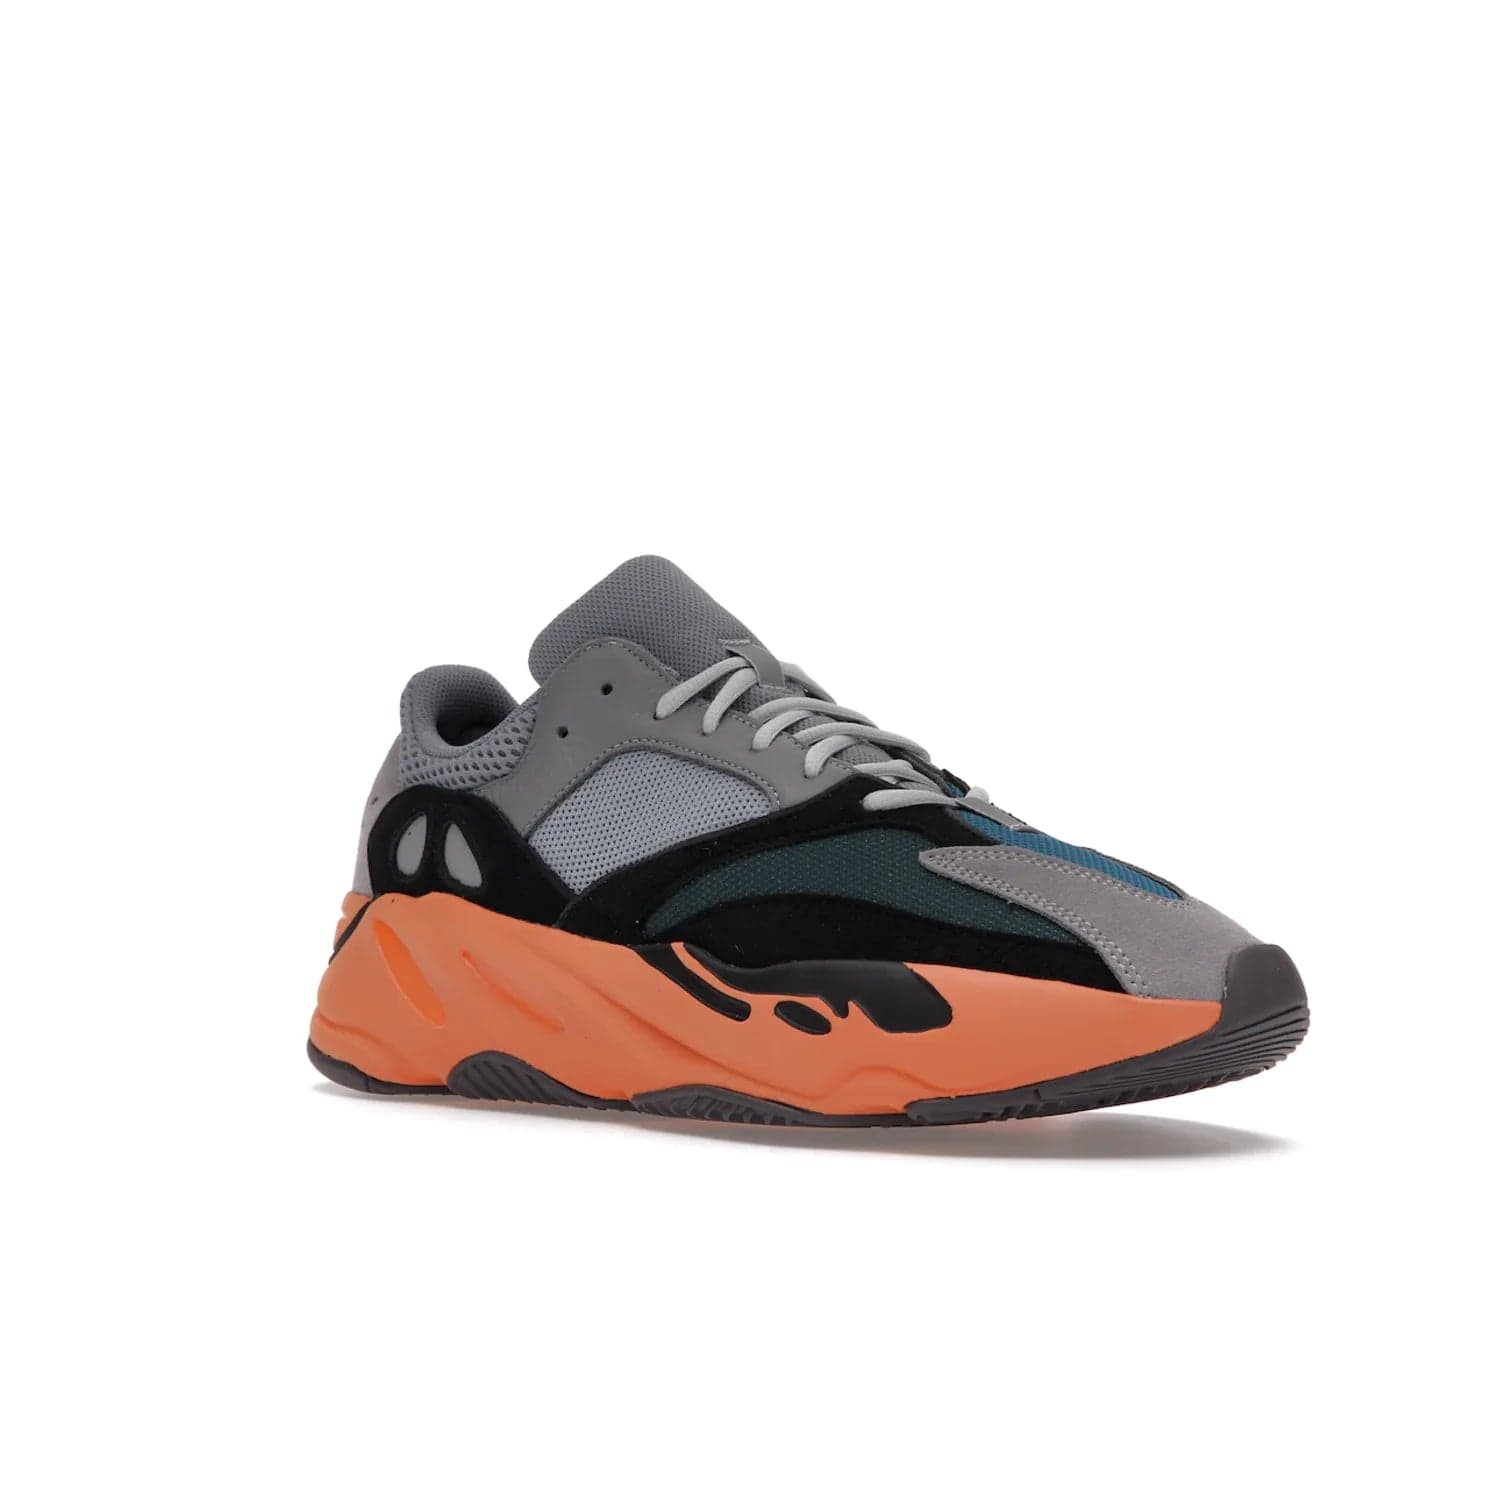 adidas Yeezy Boost 700 Wash Orange - Image 5 - Only at www.BallersClubKickz.com - Introducing the adidas Yeezy Boost 700 Wash Orange. Unique grey leather, suede, mesh upper and teal panels with a chunky Wash Orange Boost midsole. Release October 2021, make a statement today!